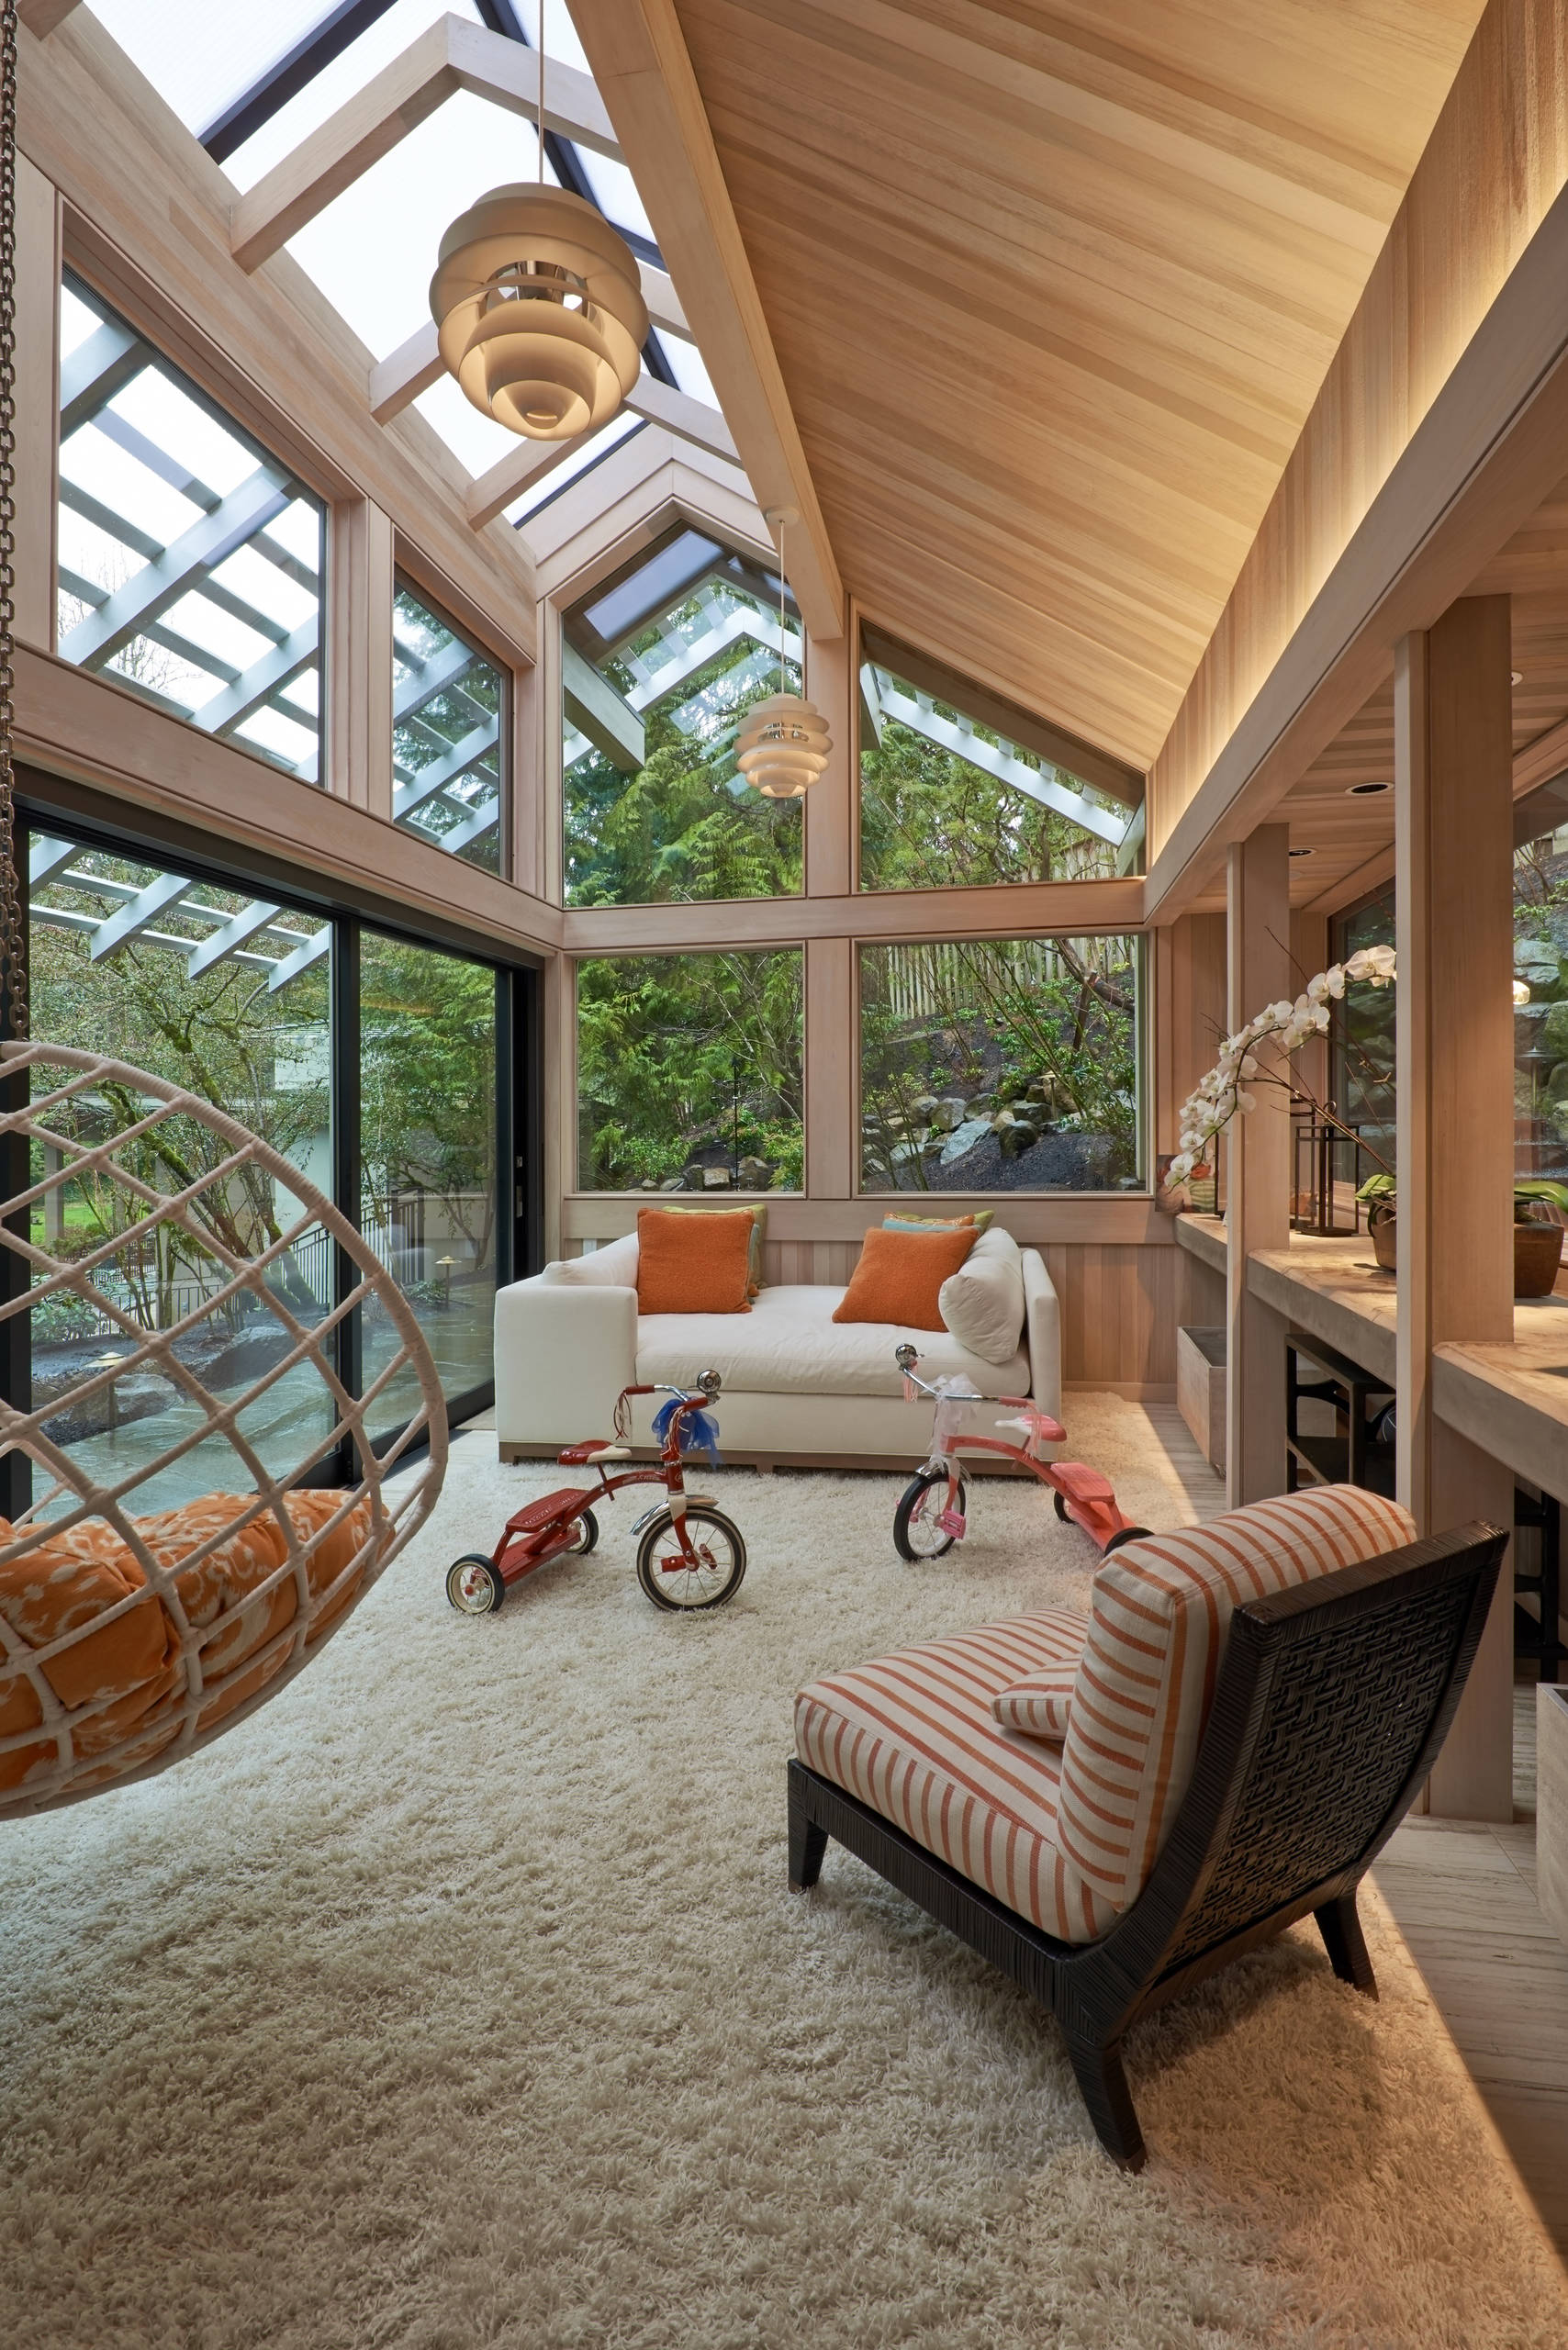  Modern Sunroom Ideas for Small Space